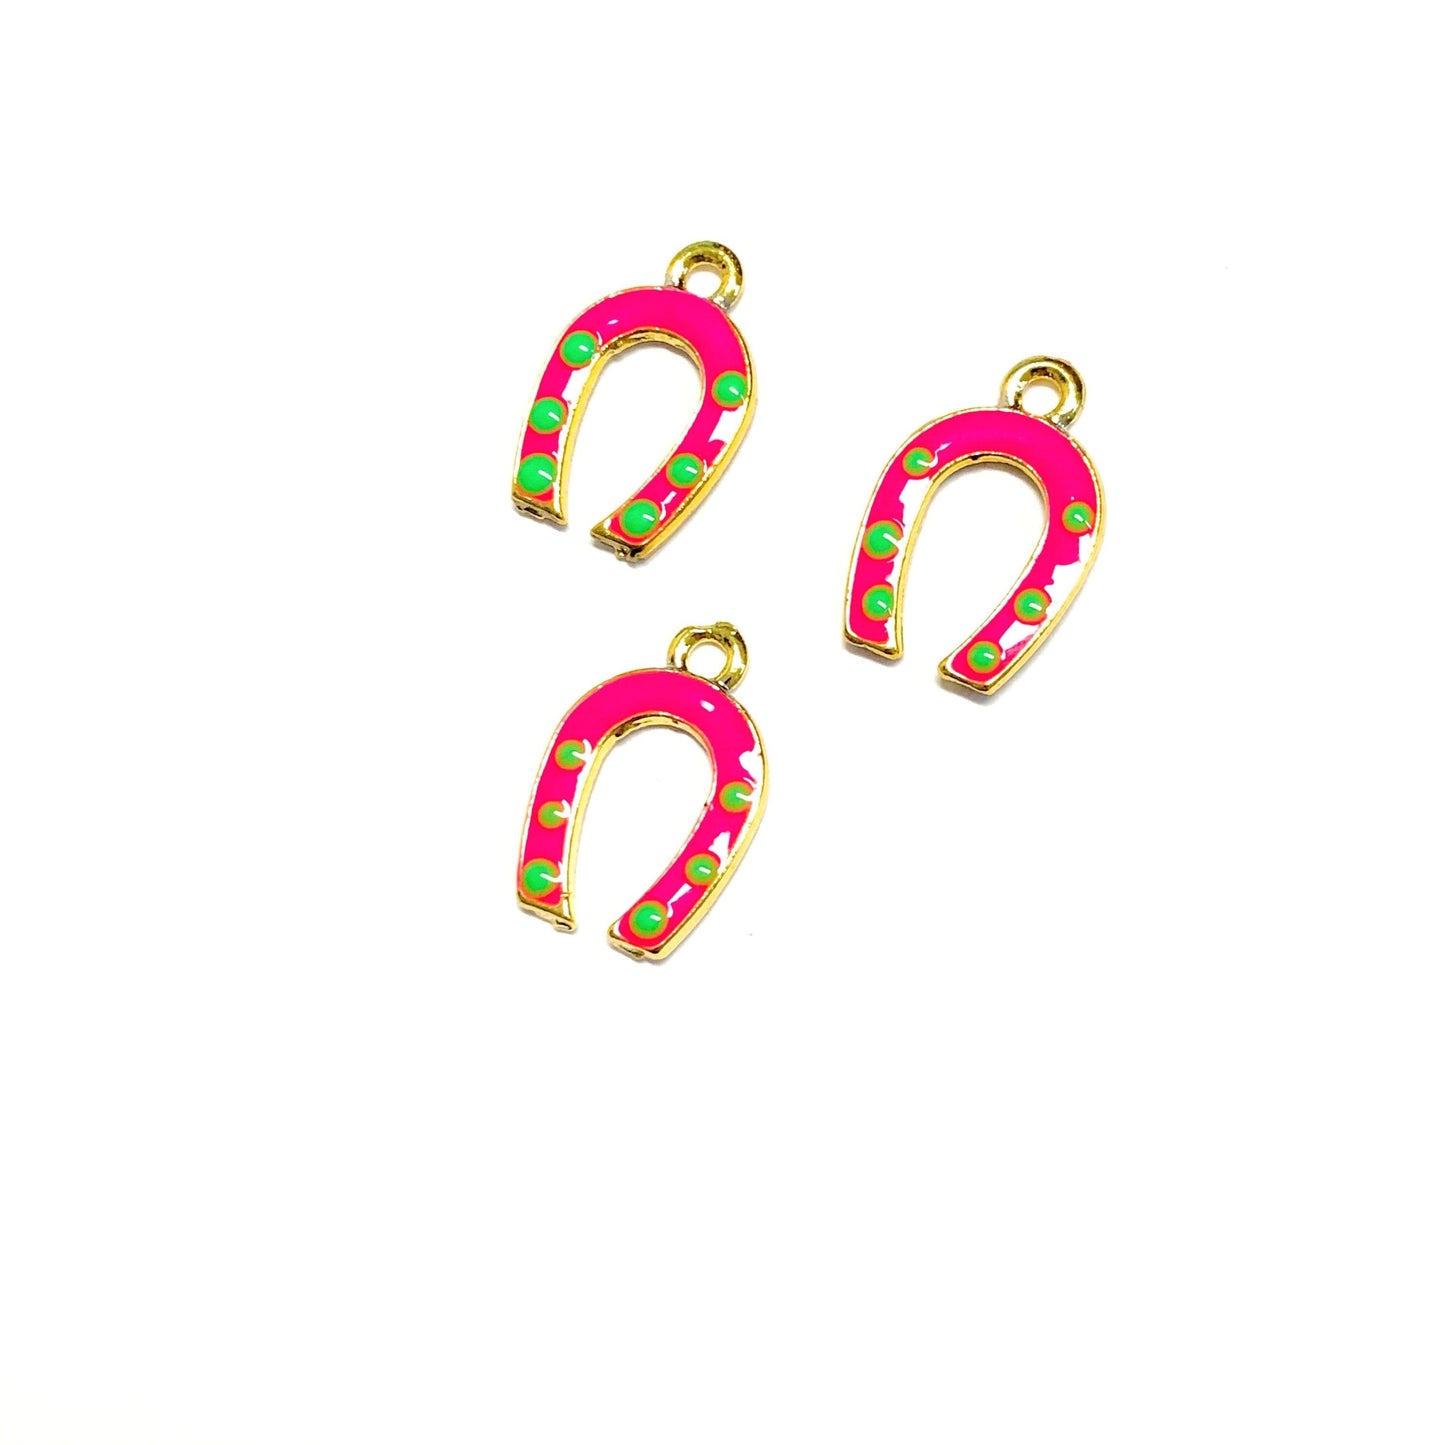 Gold Plated Enamel Horseshoe Shaking Attachment - Neon Pink, Green